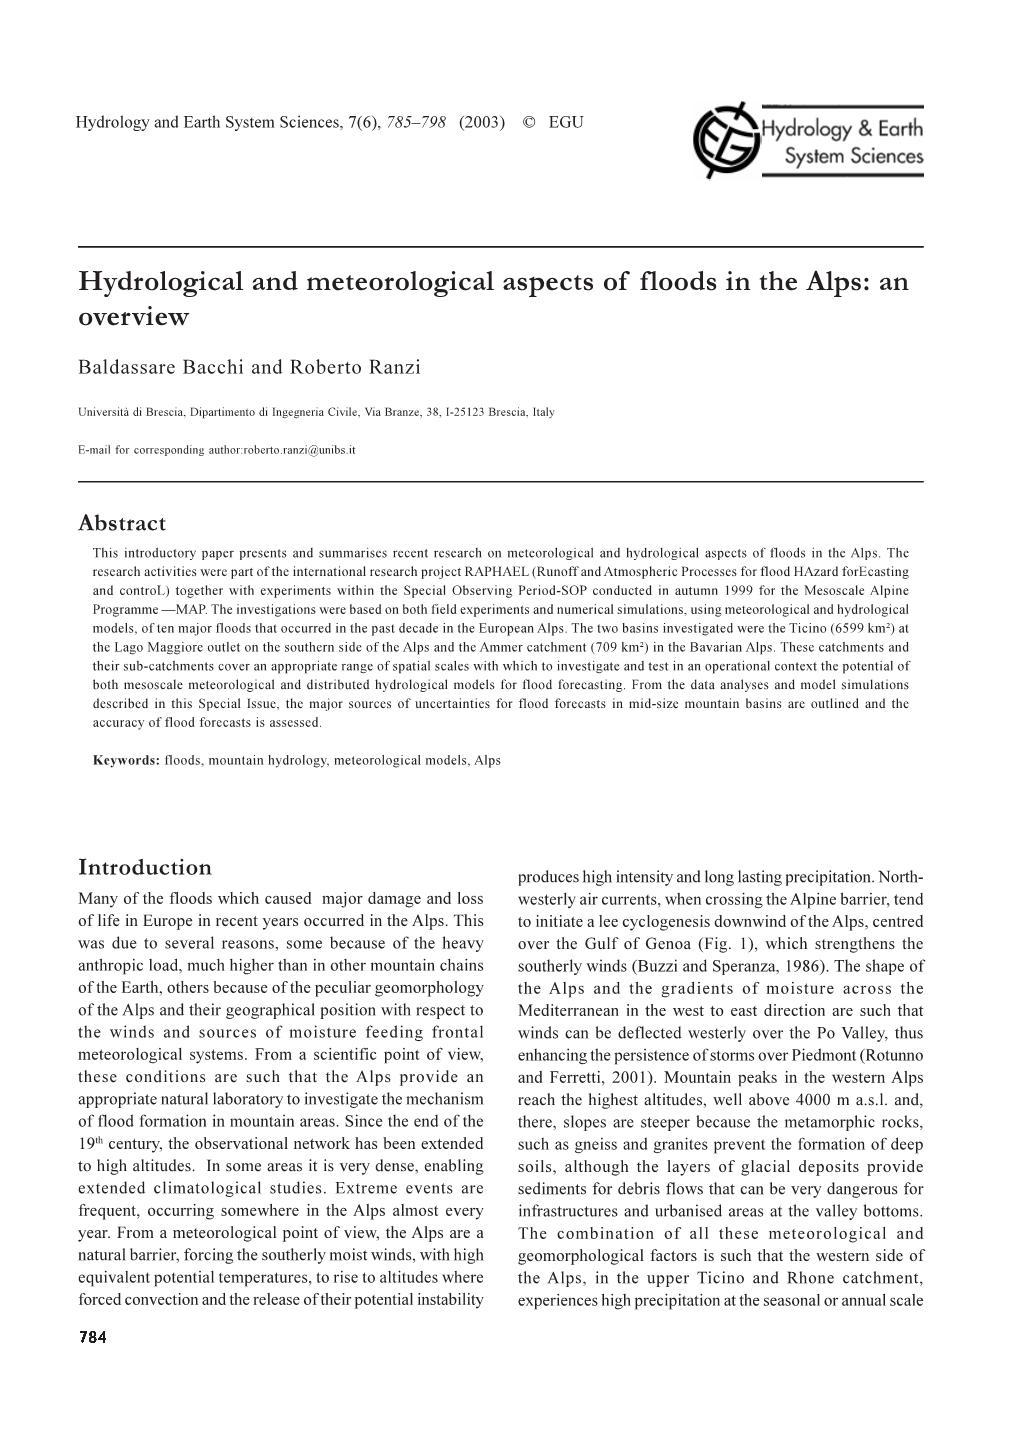 Hydrological and Meteorological Aspects of Floods in the Alps: an Overview